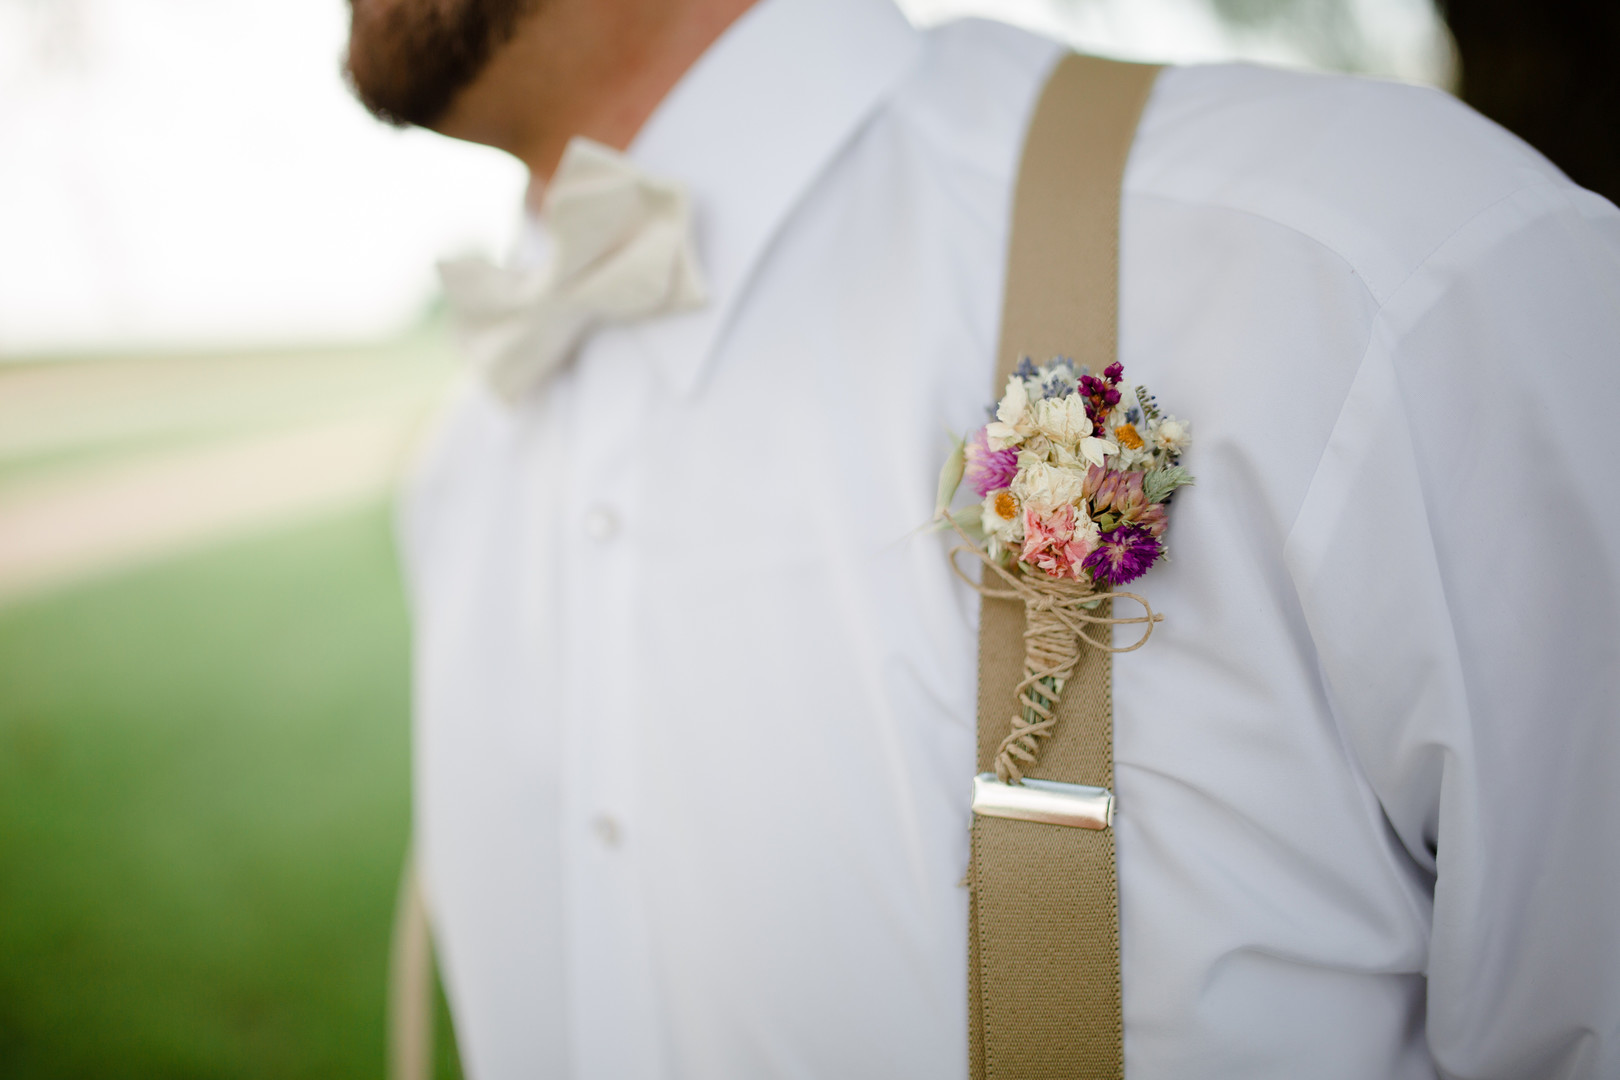 Groom's colorful wedding boutonniere: Rustic country wedding in Minooka, IL captured by Katie Brsan Photography. Visit CHItheeWED.com for more wedding inspiration!